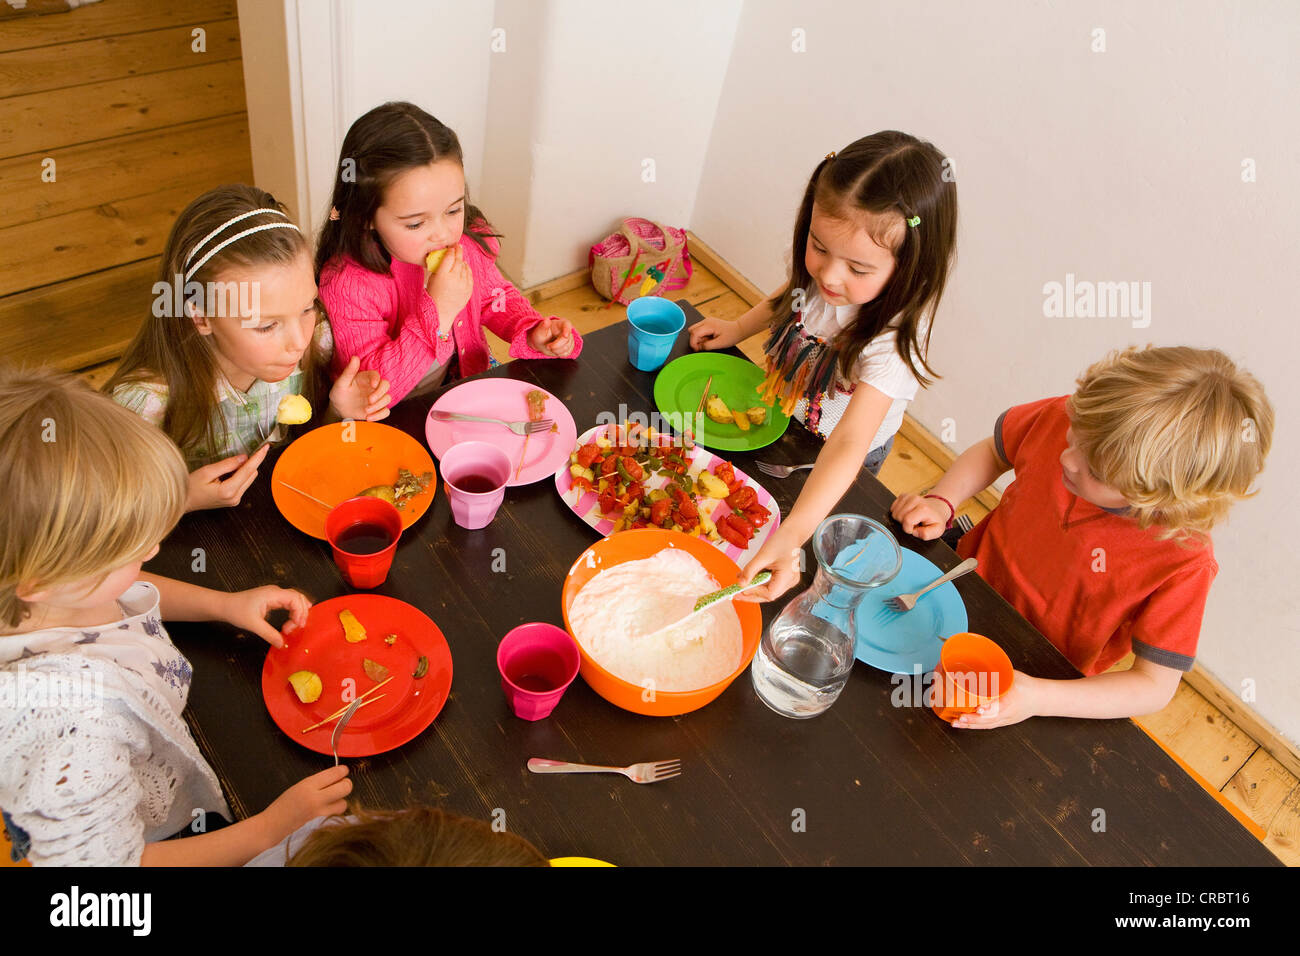 Children dipping vegetables in sauce Stock Photo